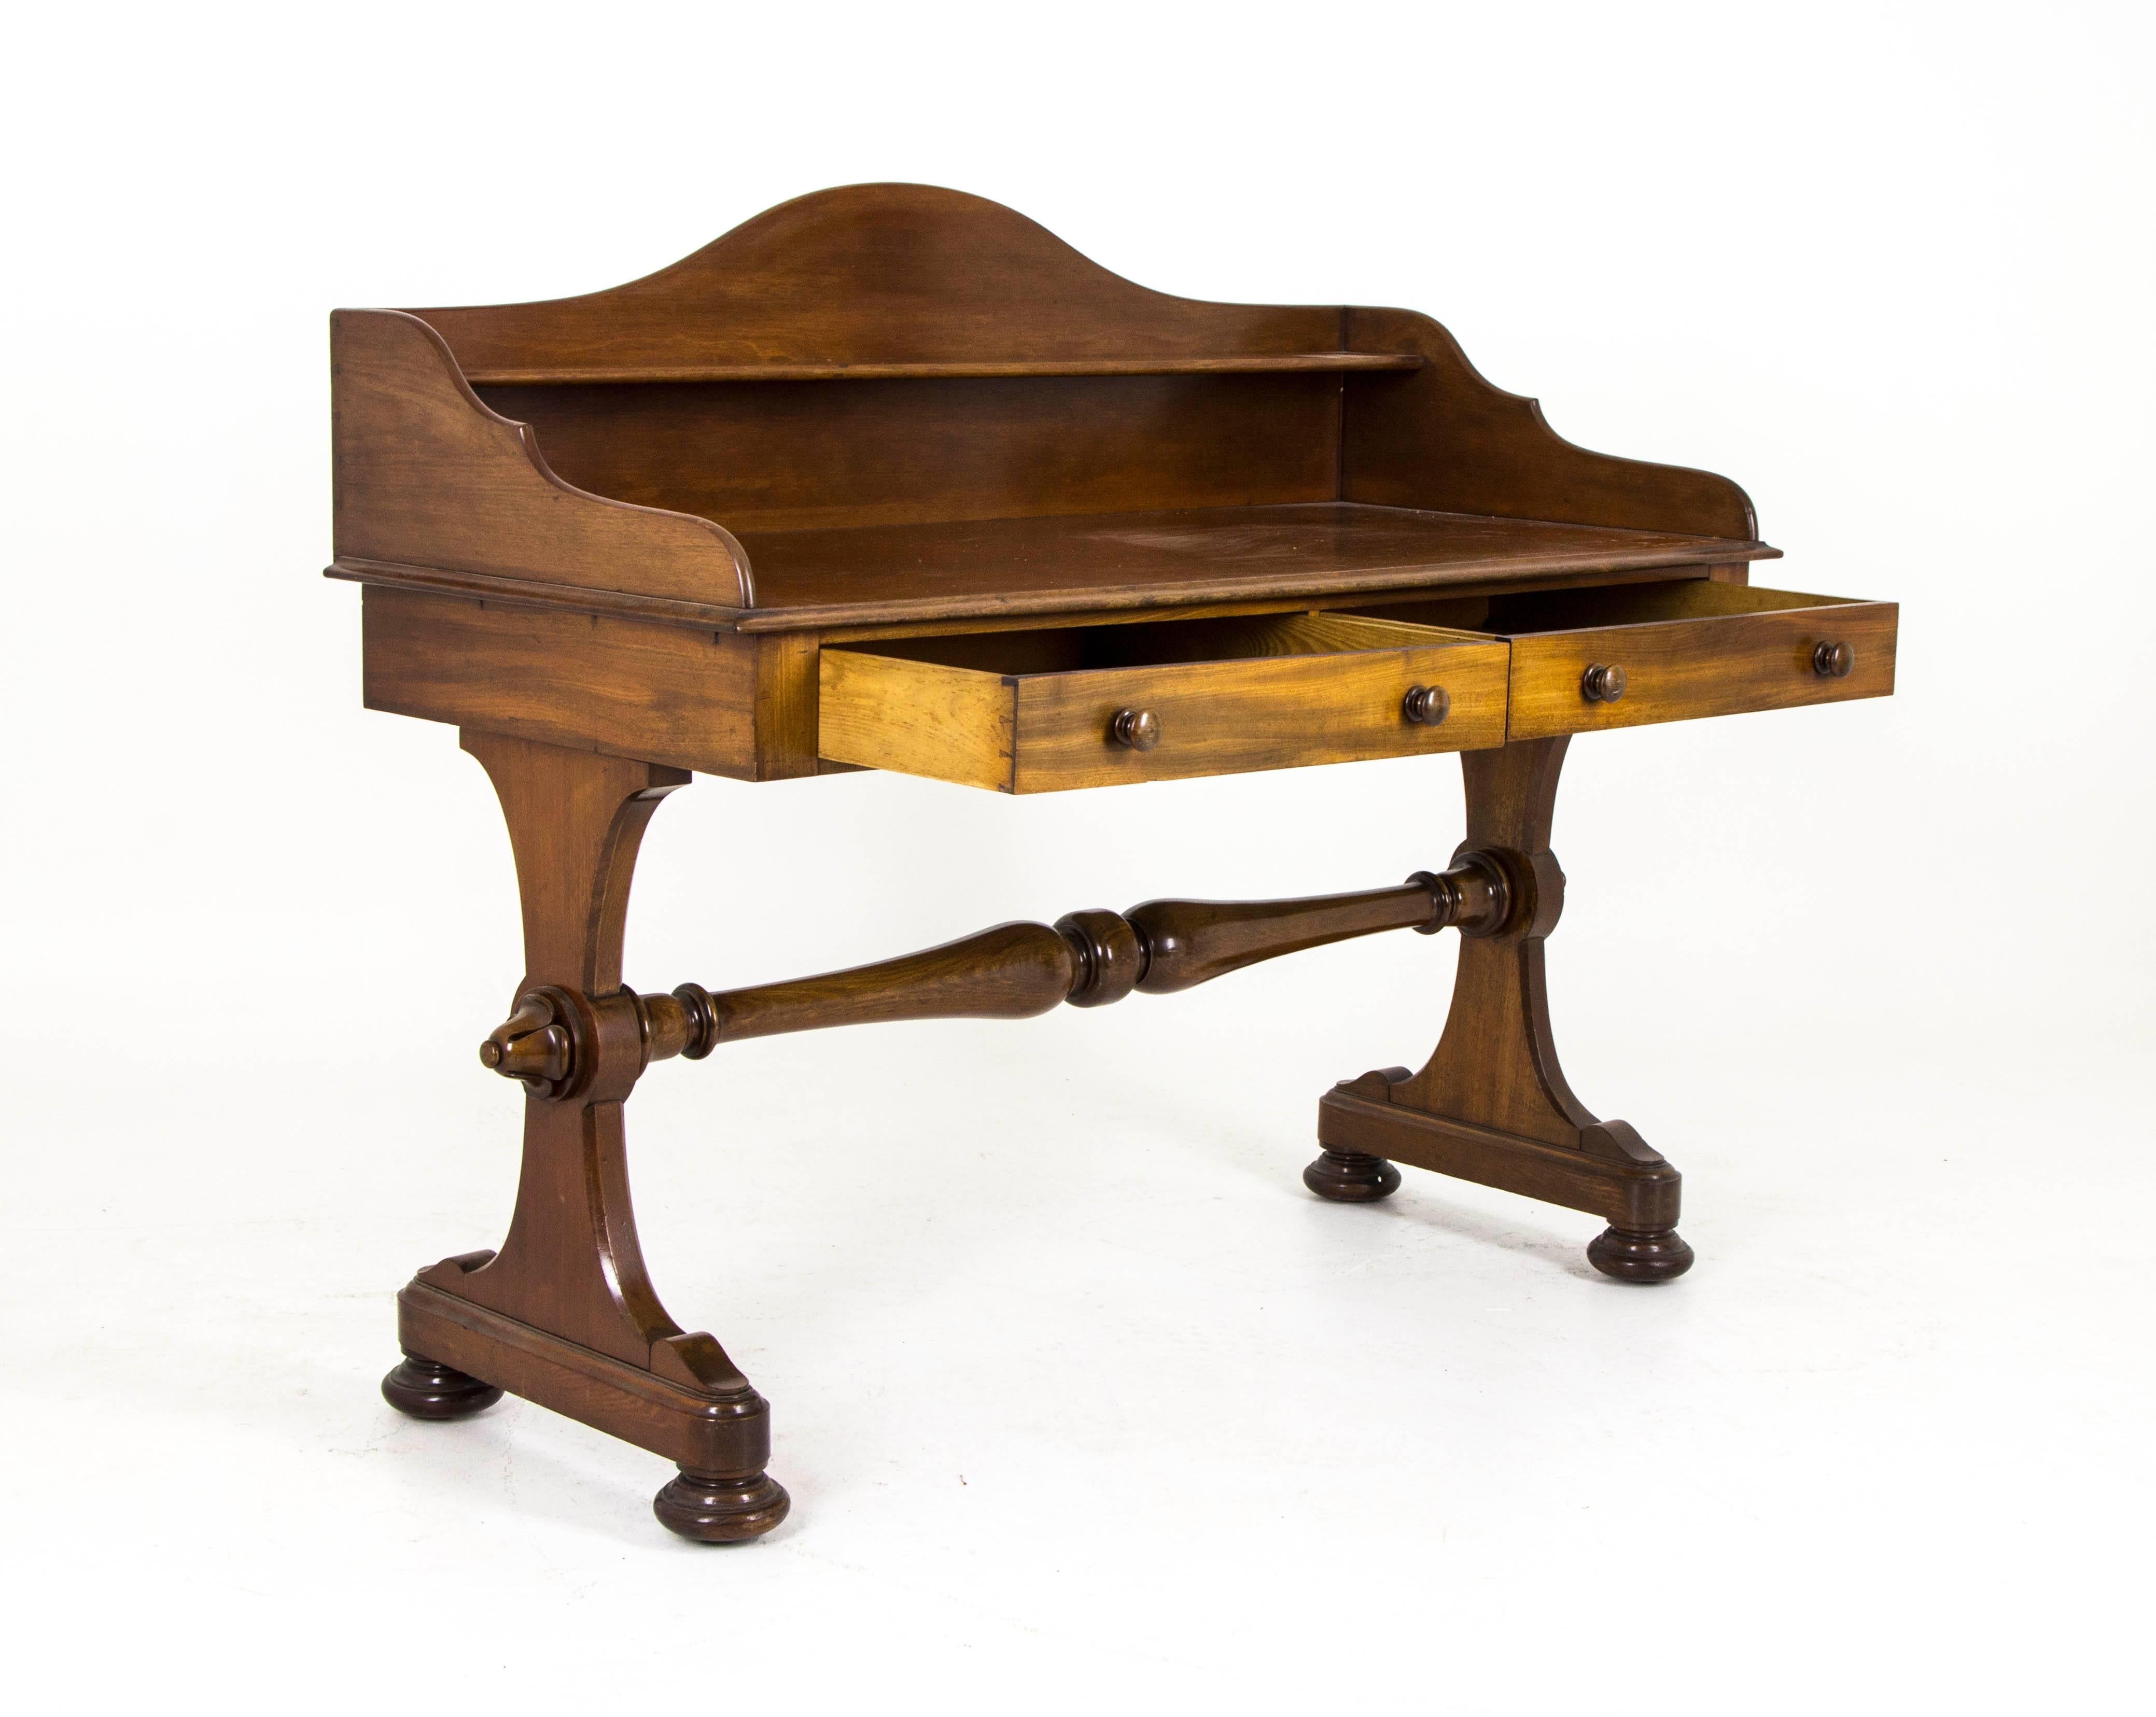 B370 large Victorian Walnut  writing table, commode with shelved back.

Scotland, 1860
Original finish
Solid Walnut 
Shelved back with sides
Two drawers with hand cut dovetails
Large turned cross stretcher
Sitting on shaped ends with original